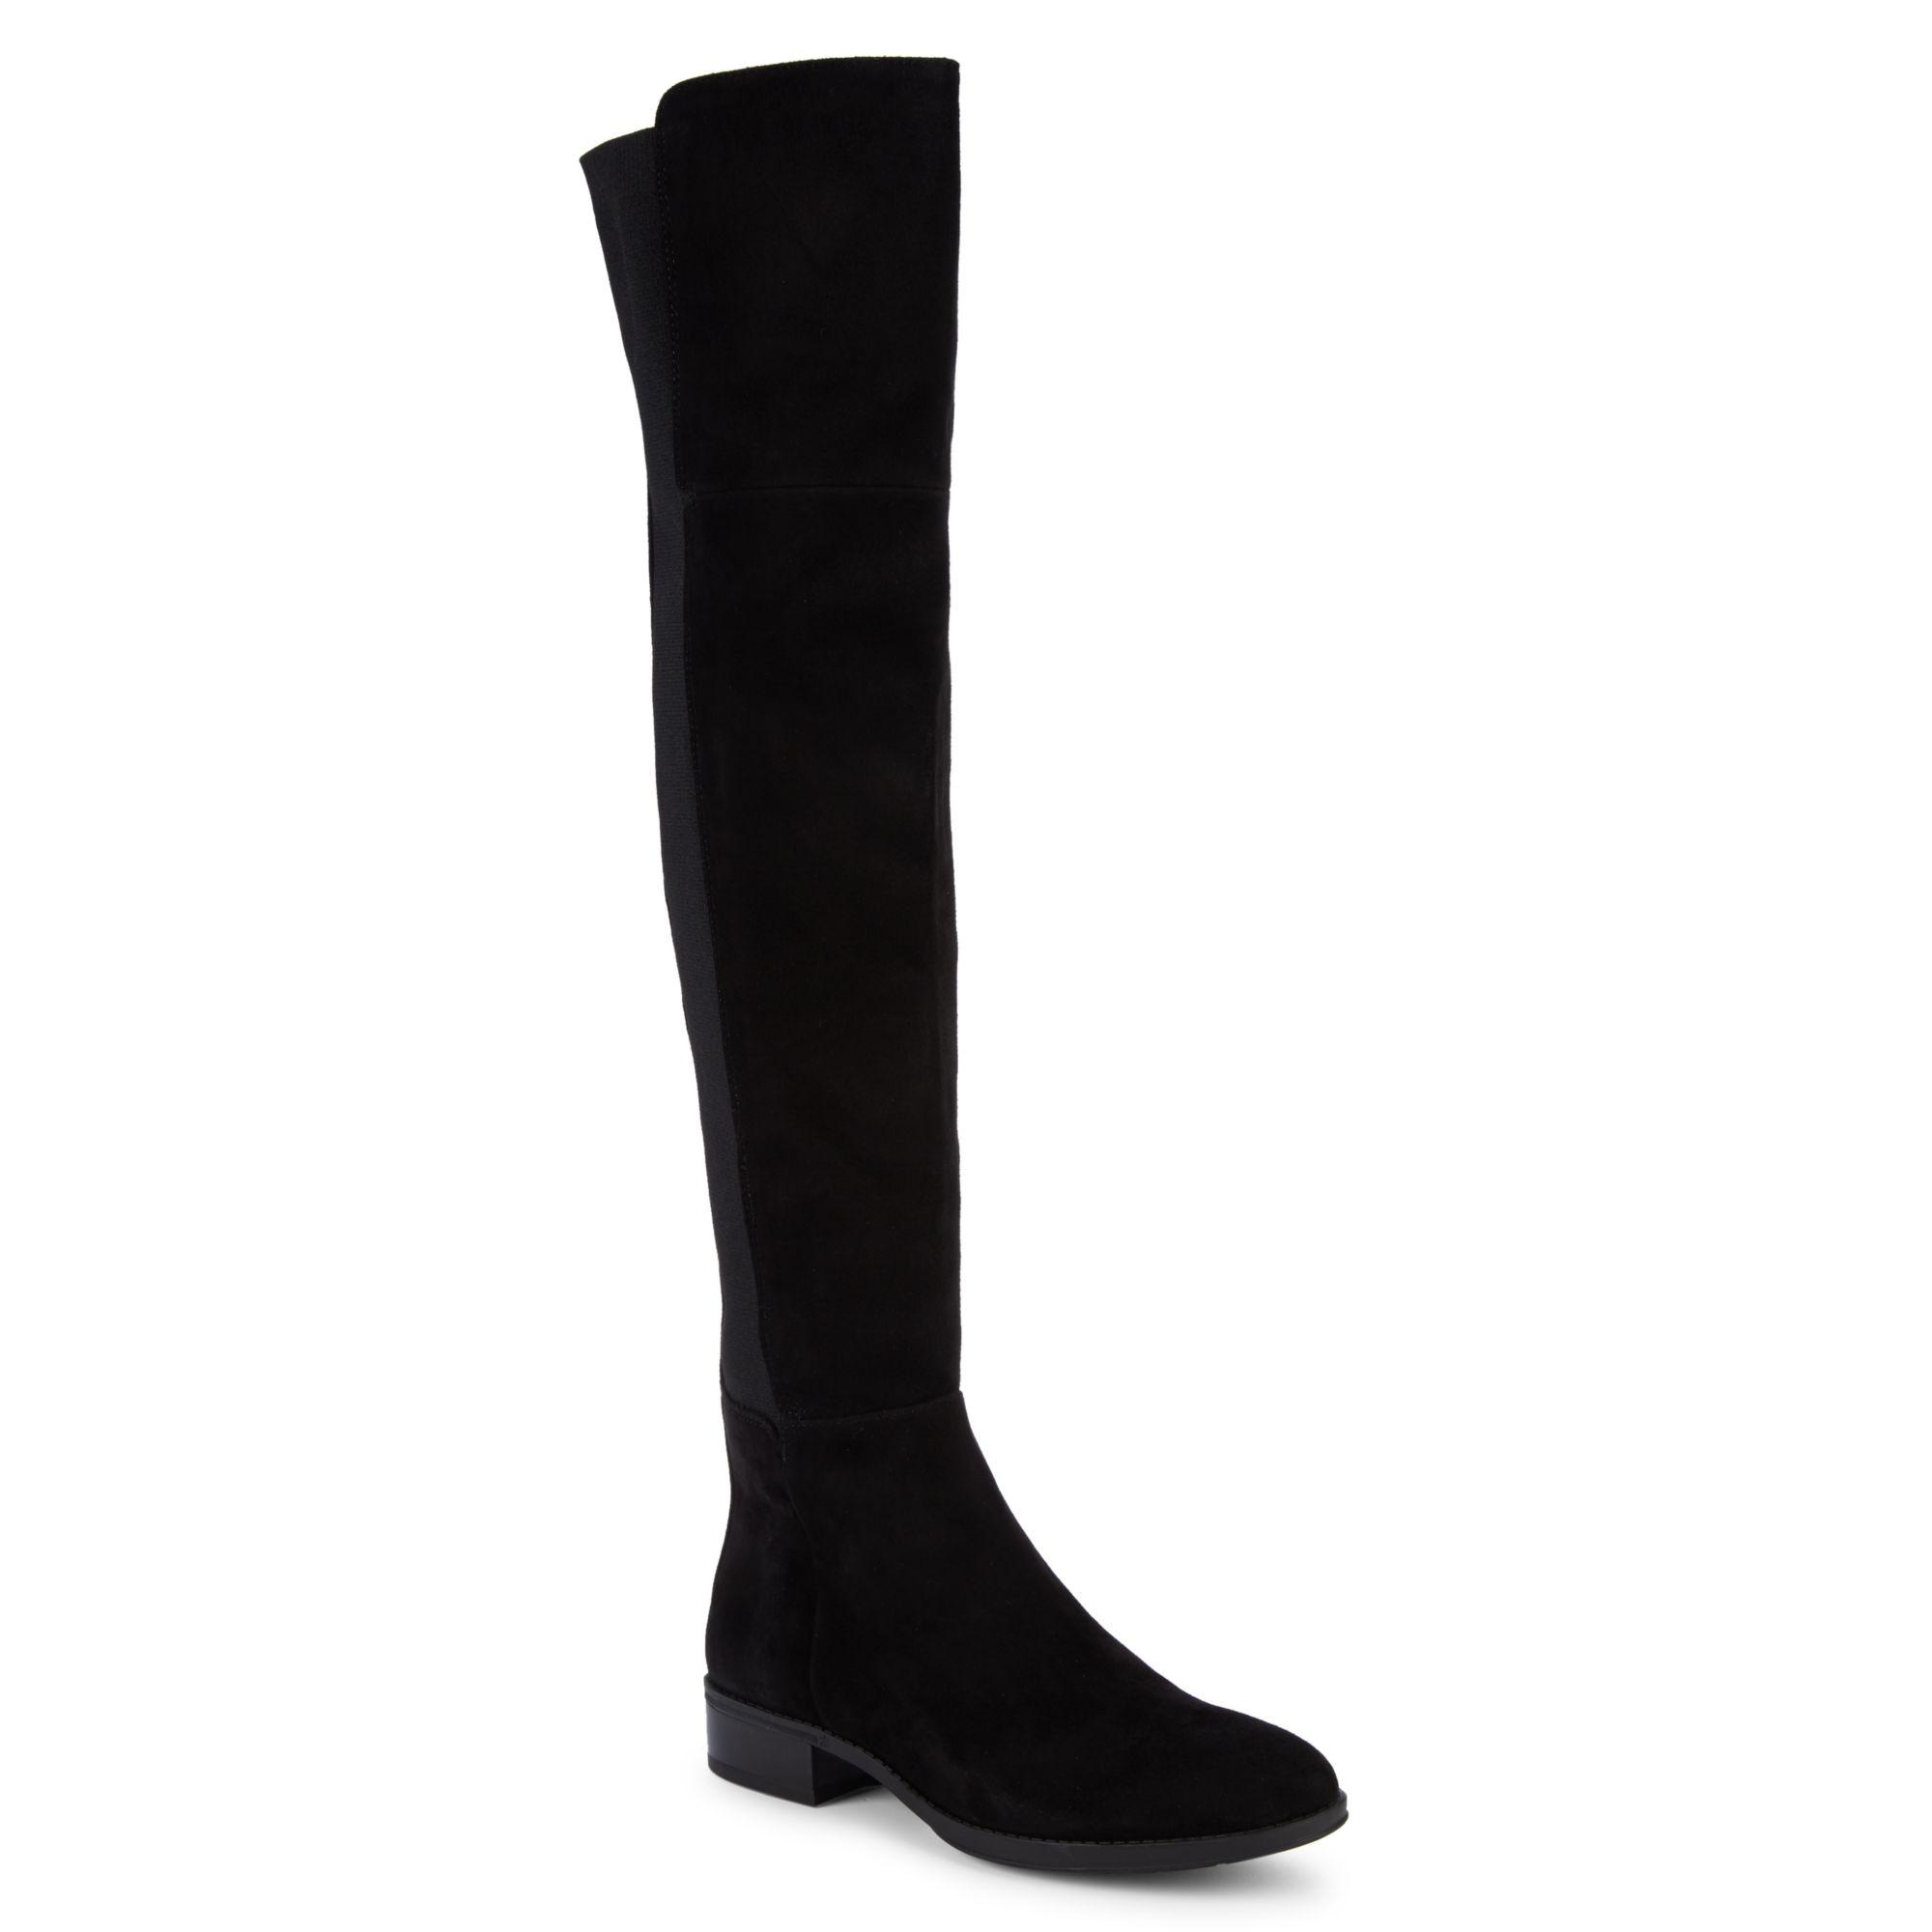 Sam Edelman Pam Suede Over-the-knee Boots in Black - Lyst